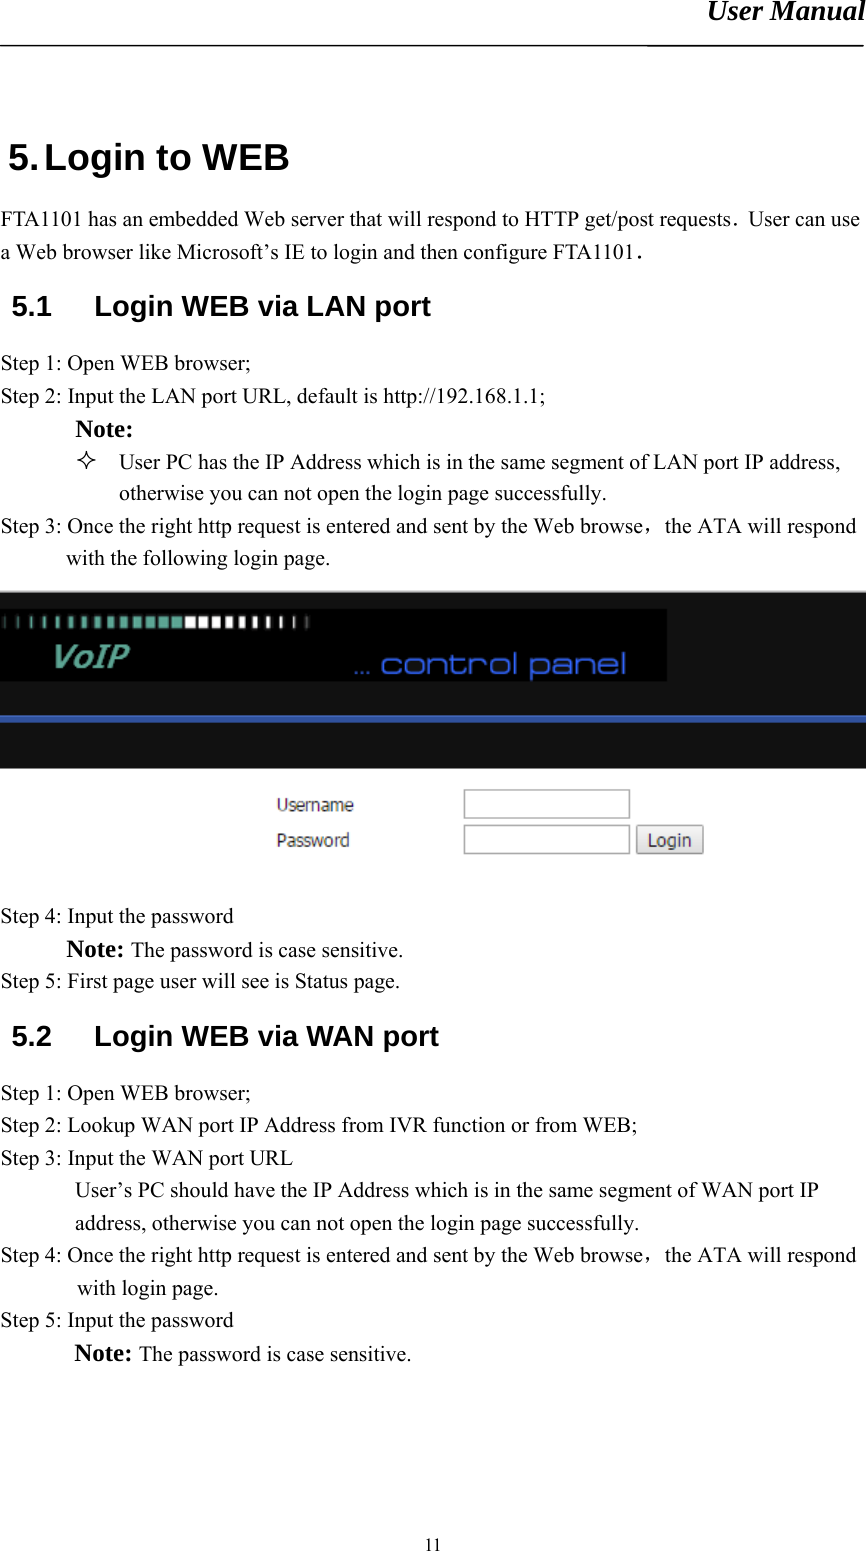 User Manual       115. Login to WEB FTA1101 has an embedded Web server that will respond to HTTP get/post requests．User can use a Web browser like Microsoft’s IE to login and then configure FTA1101． 5.1  Login WEB via LAN port Step 1: Open WEB browser; Step 2: Input the LAN port URL, default is http://192.168.1.1; Note:   User PC has the IP Address which is in the same segment of LAN port IP address, otherwise you can not open the login page successfully. Step 3: Once the right http request is entered and sent by the Web browse，the ATA will respond with the following login page.  Step 4: Input the password  Note: The password is case sensitive. Step 5: First page user will see is Status page. 5.2  Login WEB via WAN port Step 1: Open WEB browser; Step 2: Lookup WAN port IP Address from IVR function or from WEB; Step 3: Input the WAN port URL User’s PC should have the IP Address which is in the same segment of WAN port IP address, otherwise you can not open the login page successfully. Step 4: Once the right http request is entered and sent by the Web browse，the ATA will respond with login page. Step 5: Input the password Note: The password is case sensitive. 